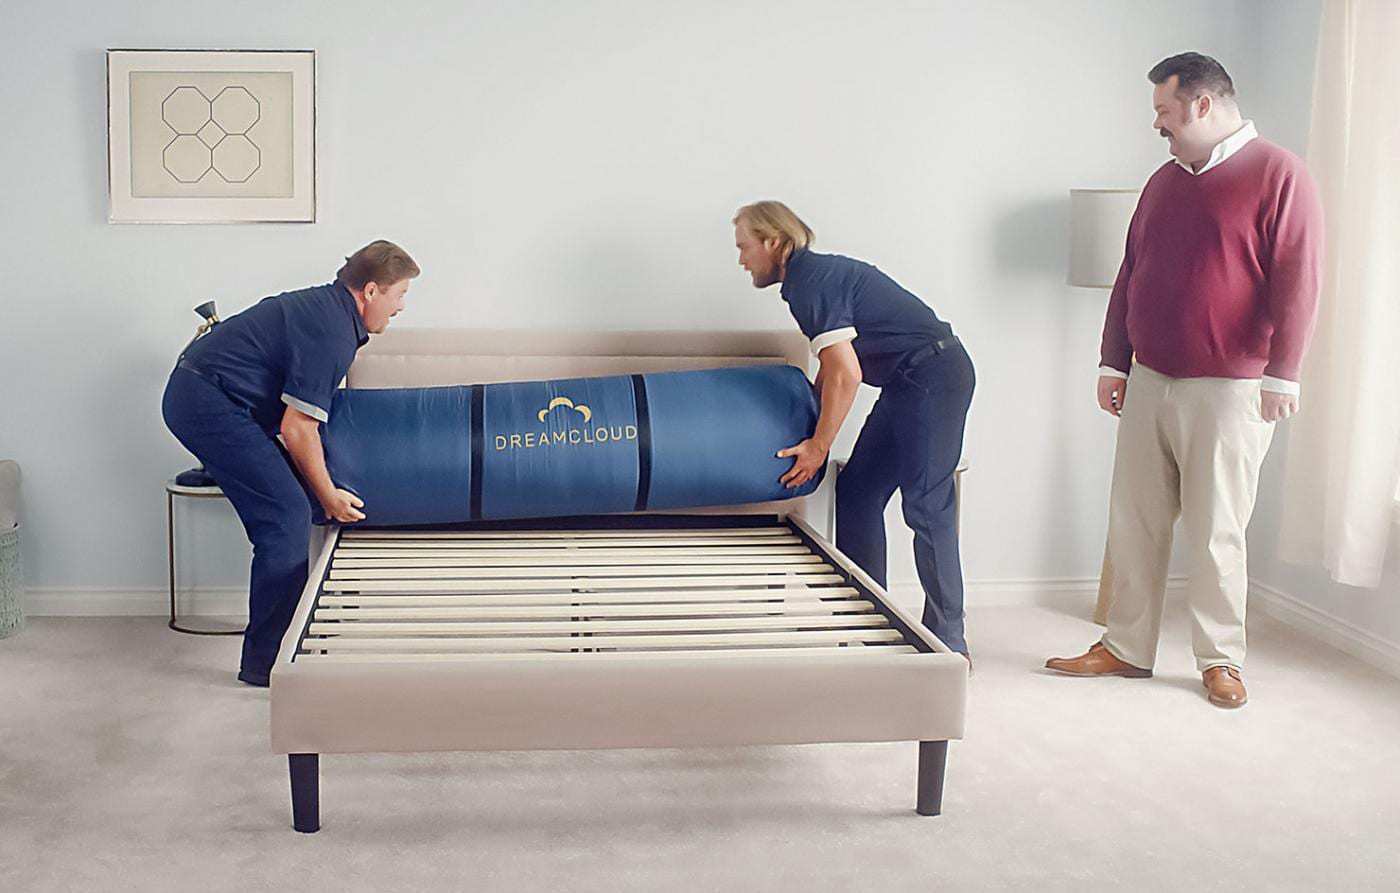 Who Carries The Dreamcloud Mattress?